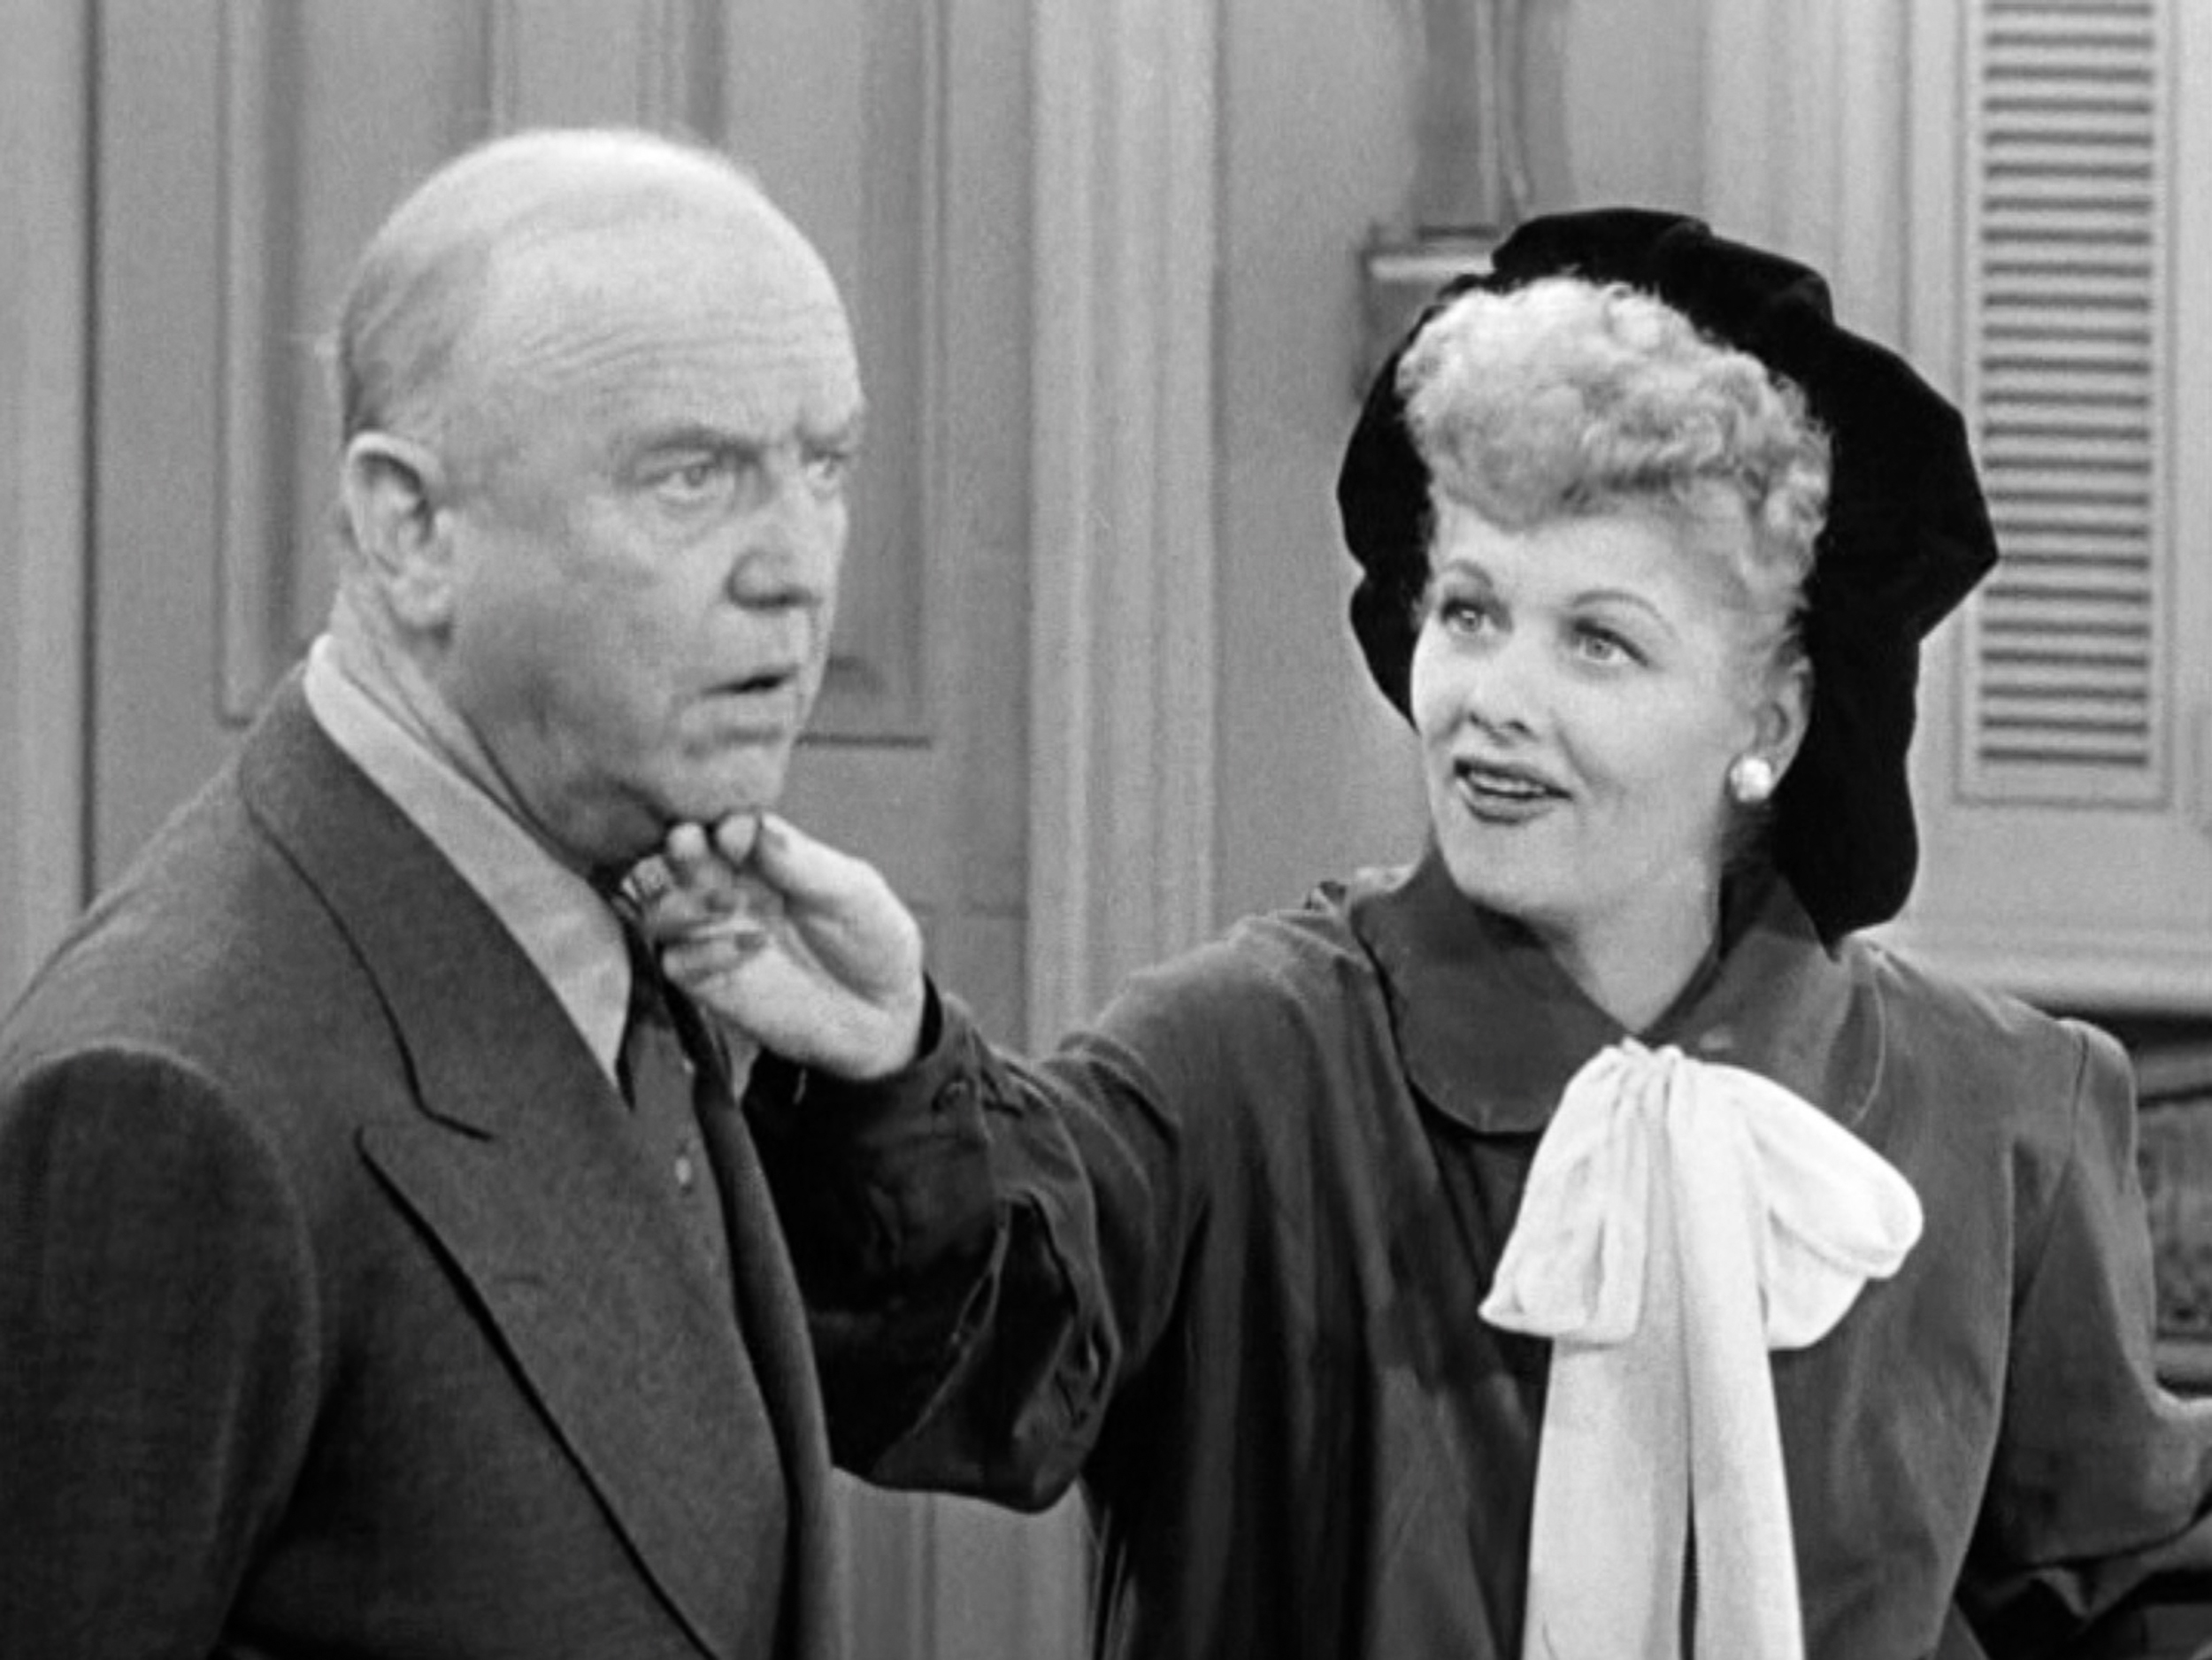 Still of Lucille Ball and William Frawley in I Love Lucy (1951)